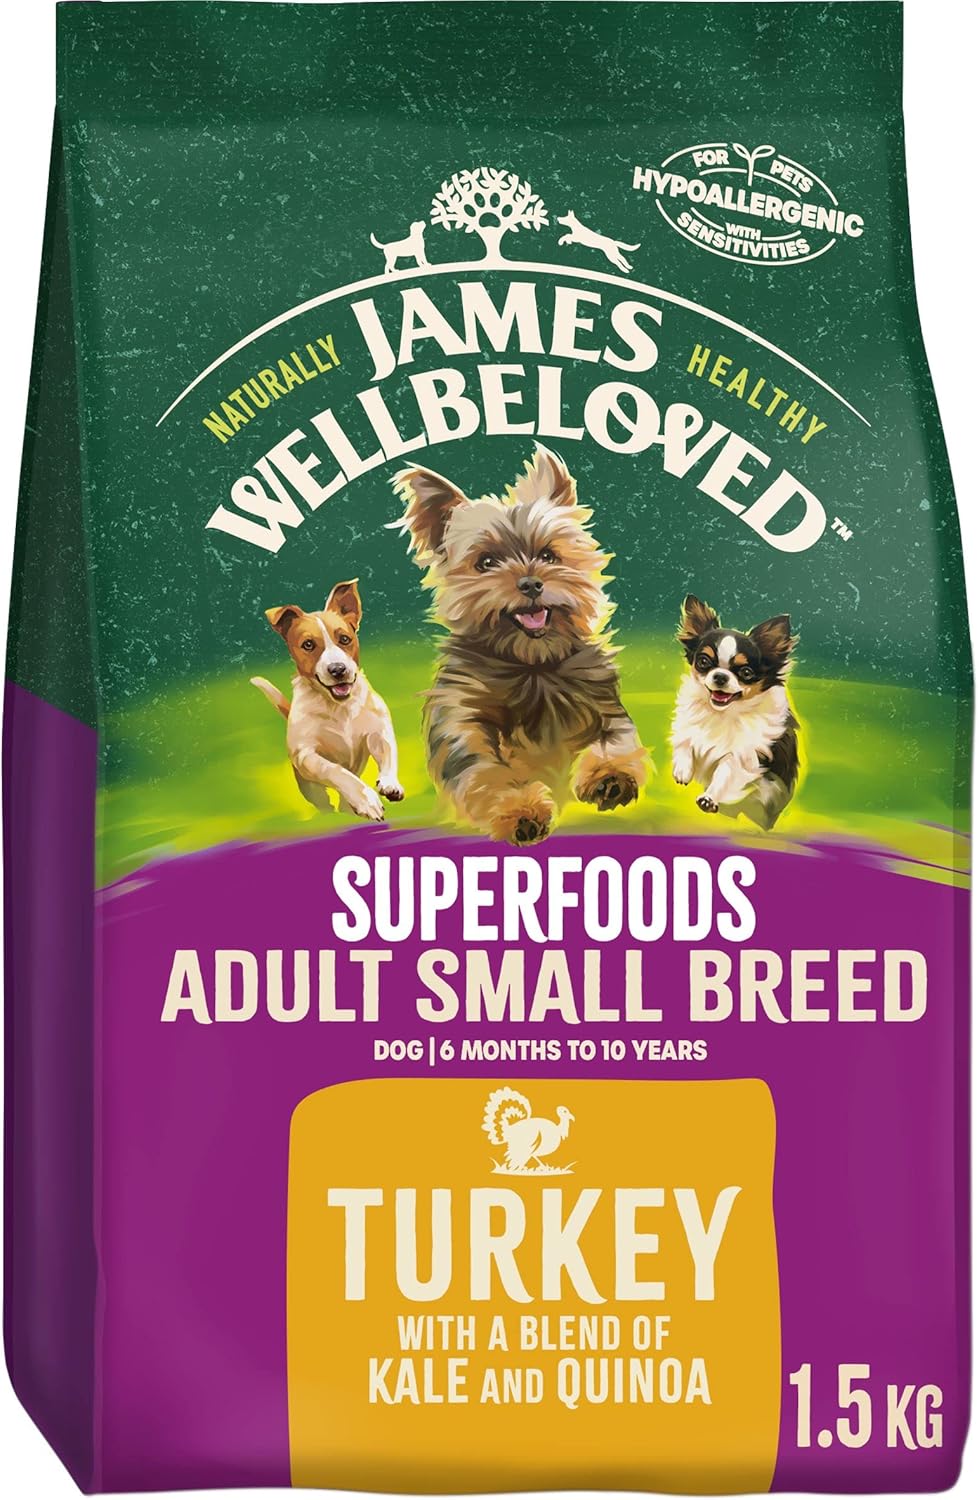 JWB Superfood Adult Small Breed Turkey Kale and Quinoa 1.5 kg Bag, Hypoallergenic Dry Dog Food?unit437328